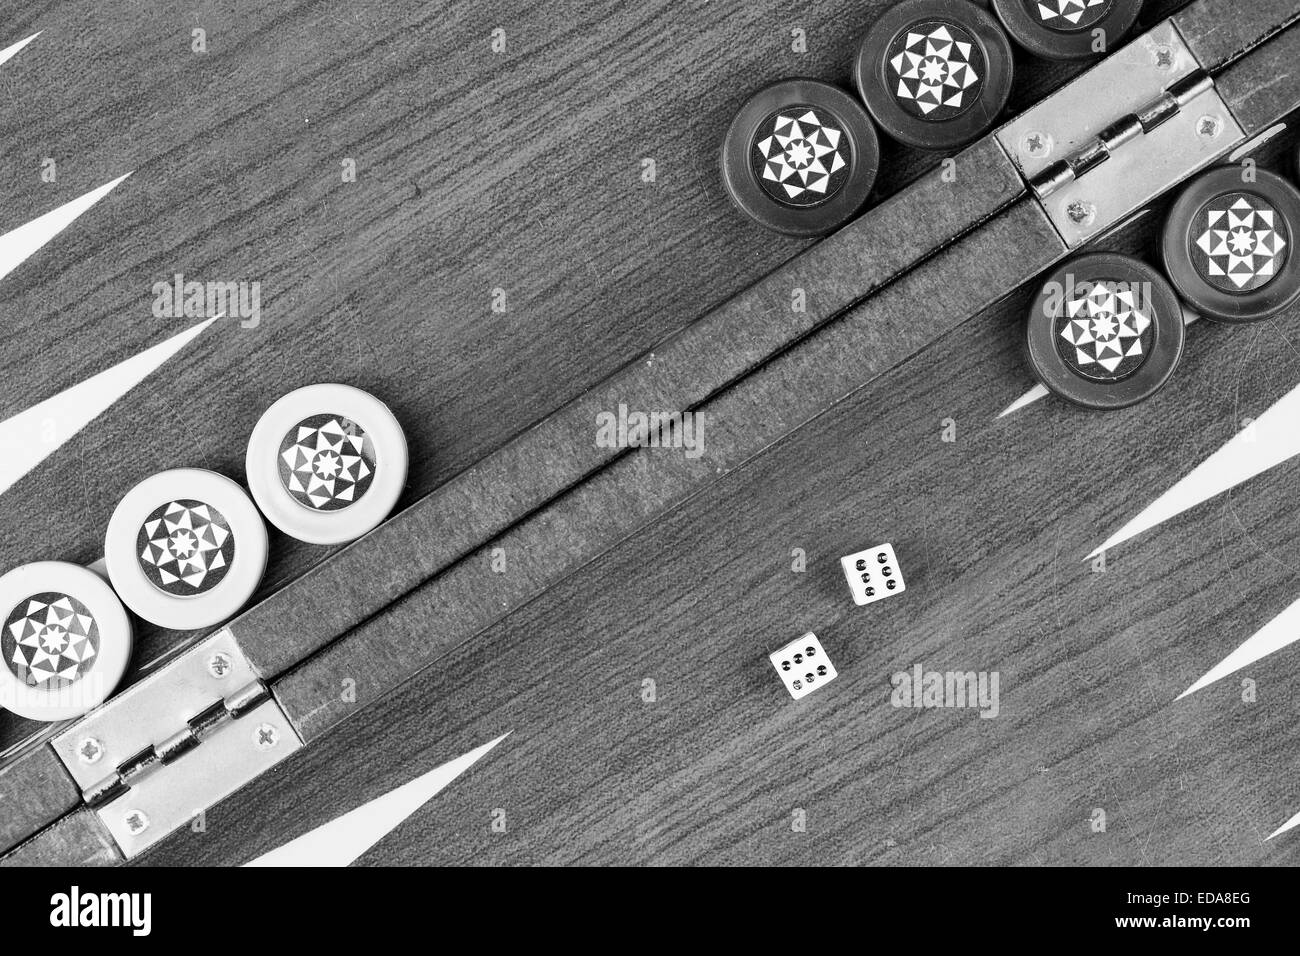 Backgammon table and double six dice closeup black and white Stock Photo